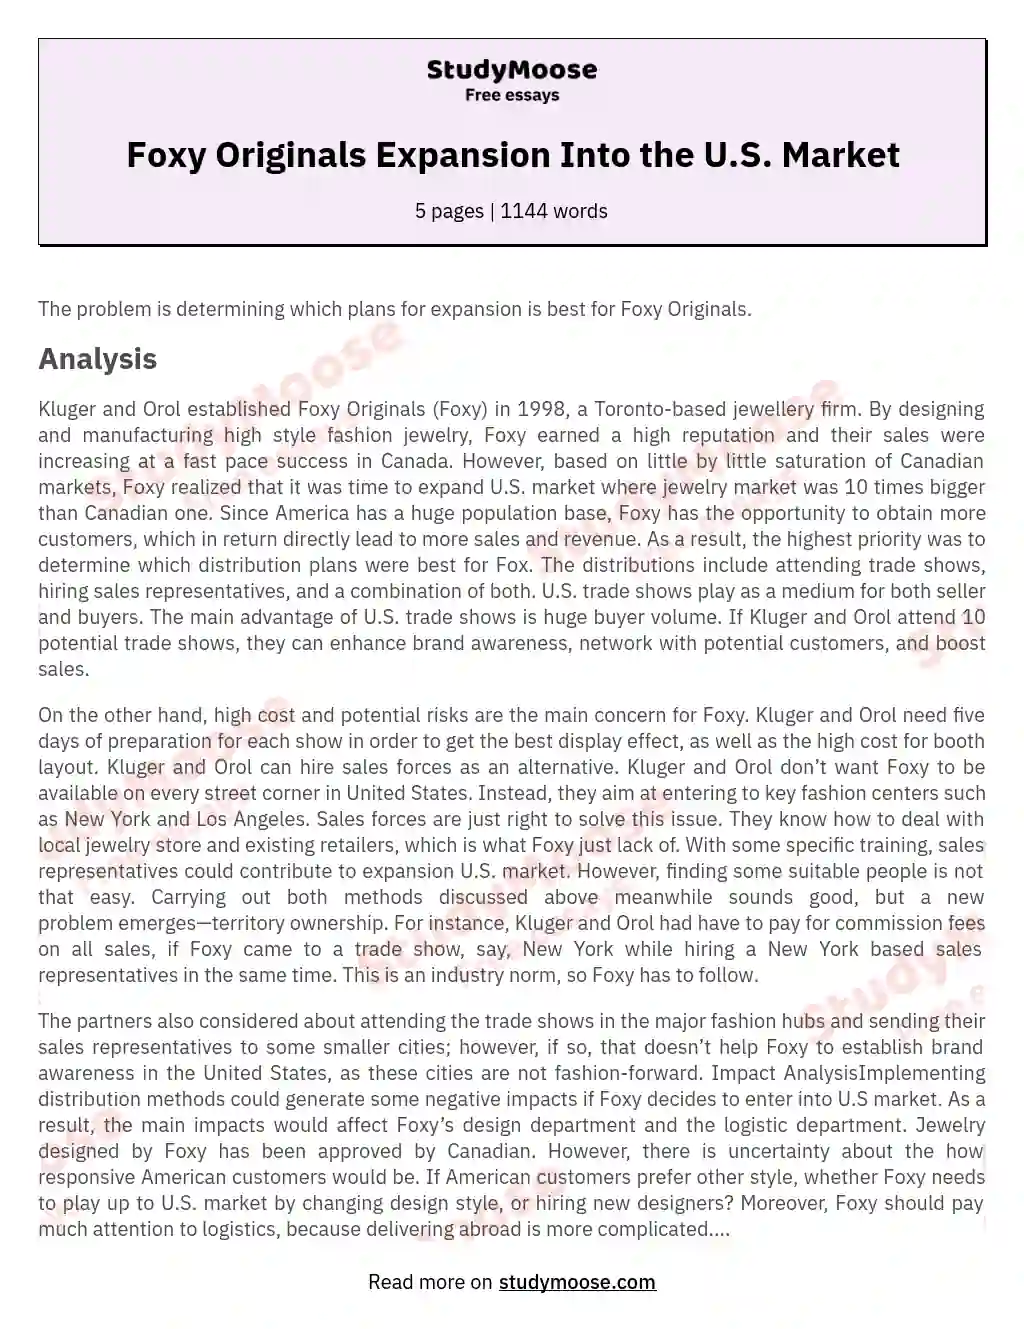 Optimal Expansion Strategy for Foxy Originals: Analysis and Recommendation essay